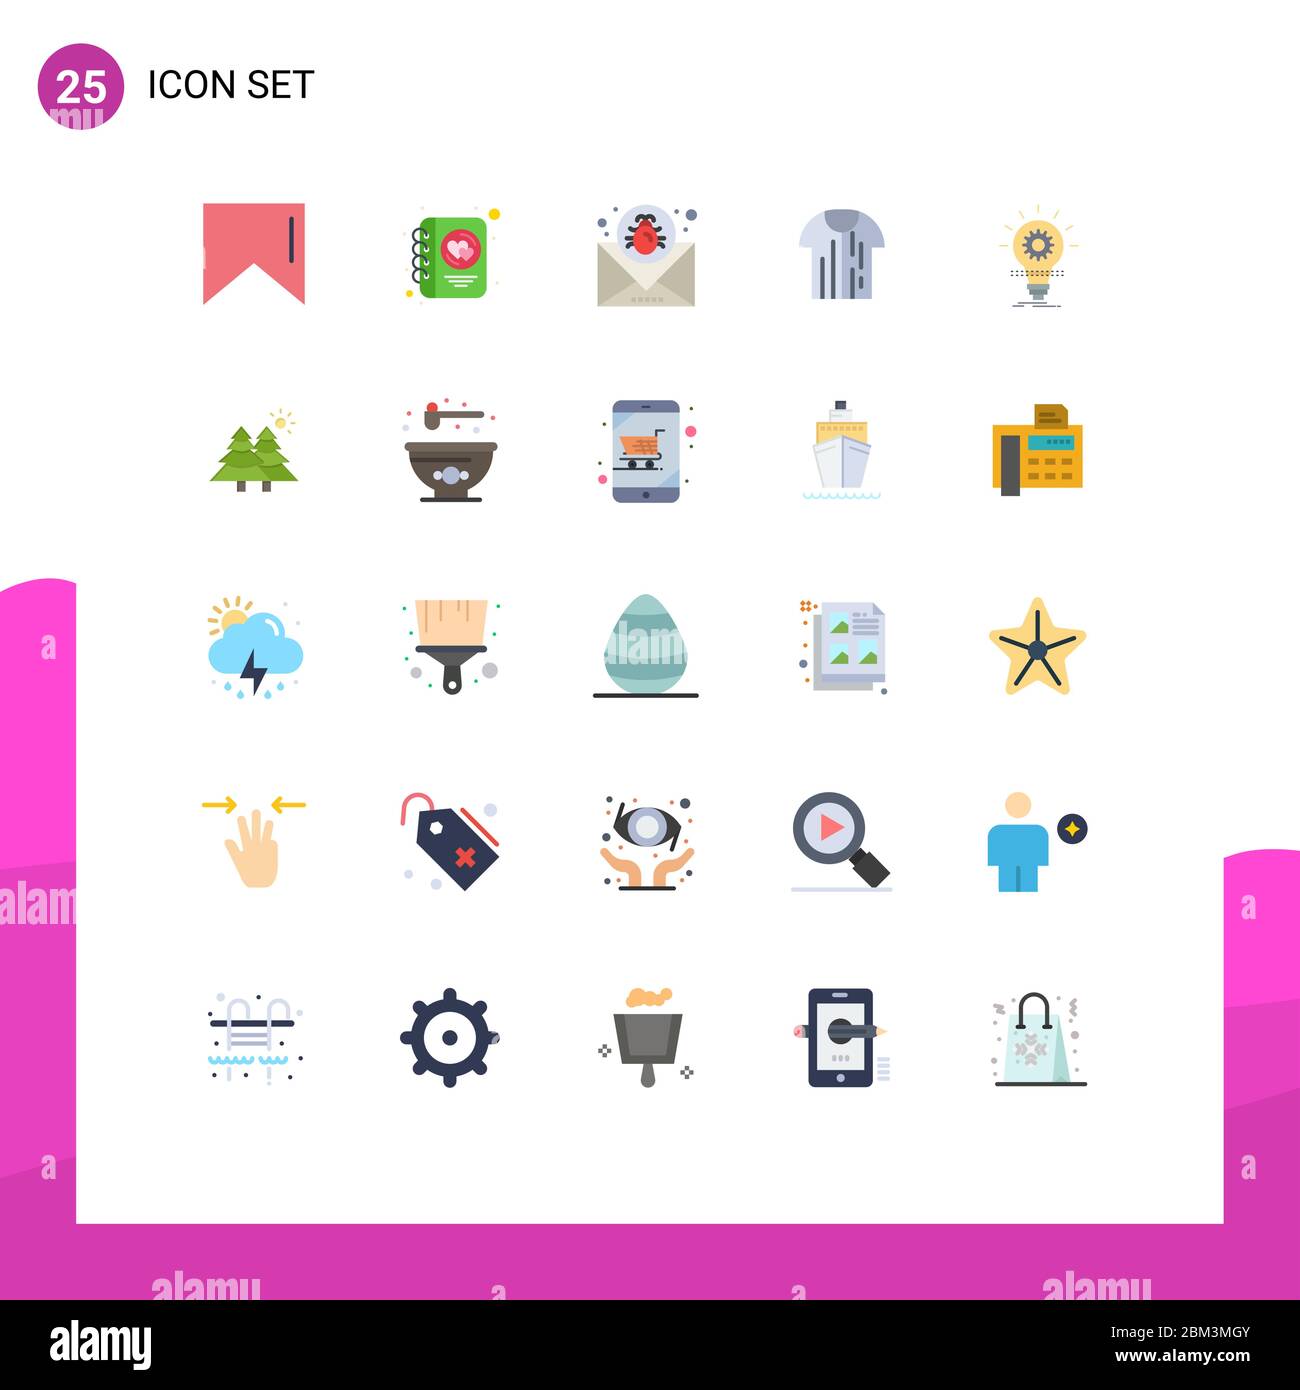 User Interface Pack of 25 Basic Flat Colors of develop, trikot, email, tshirt, sport Editable Vector Design Elements Stock Vector